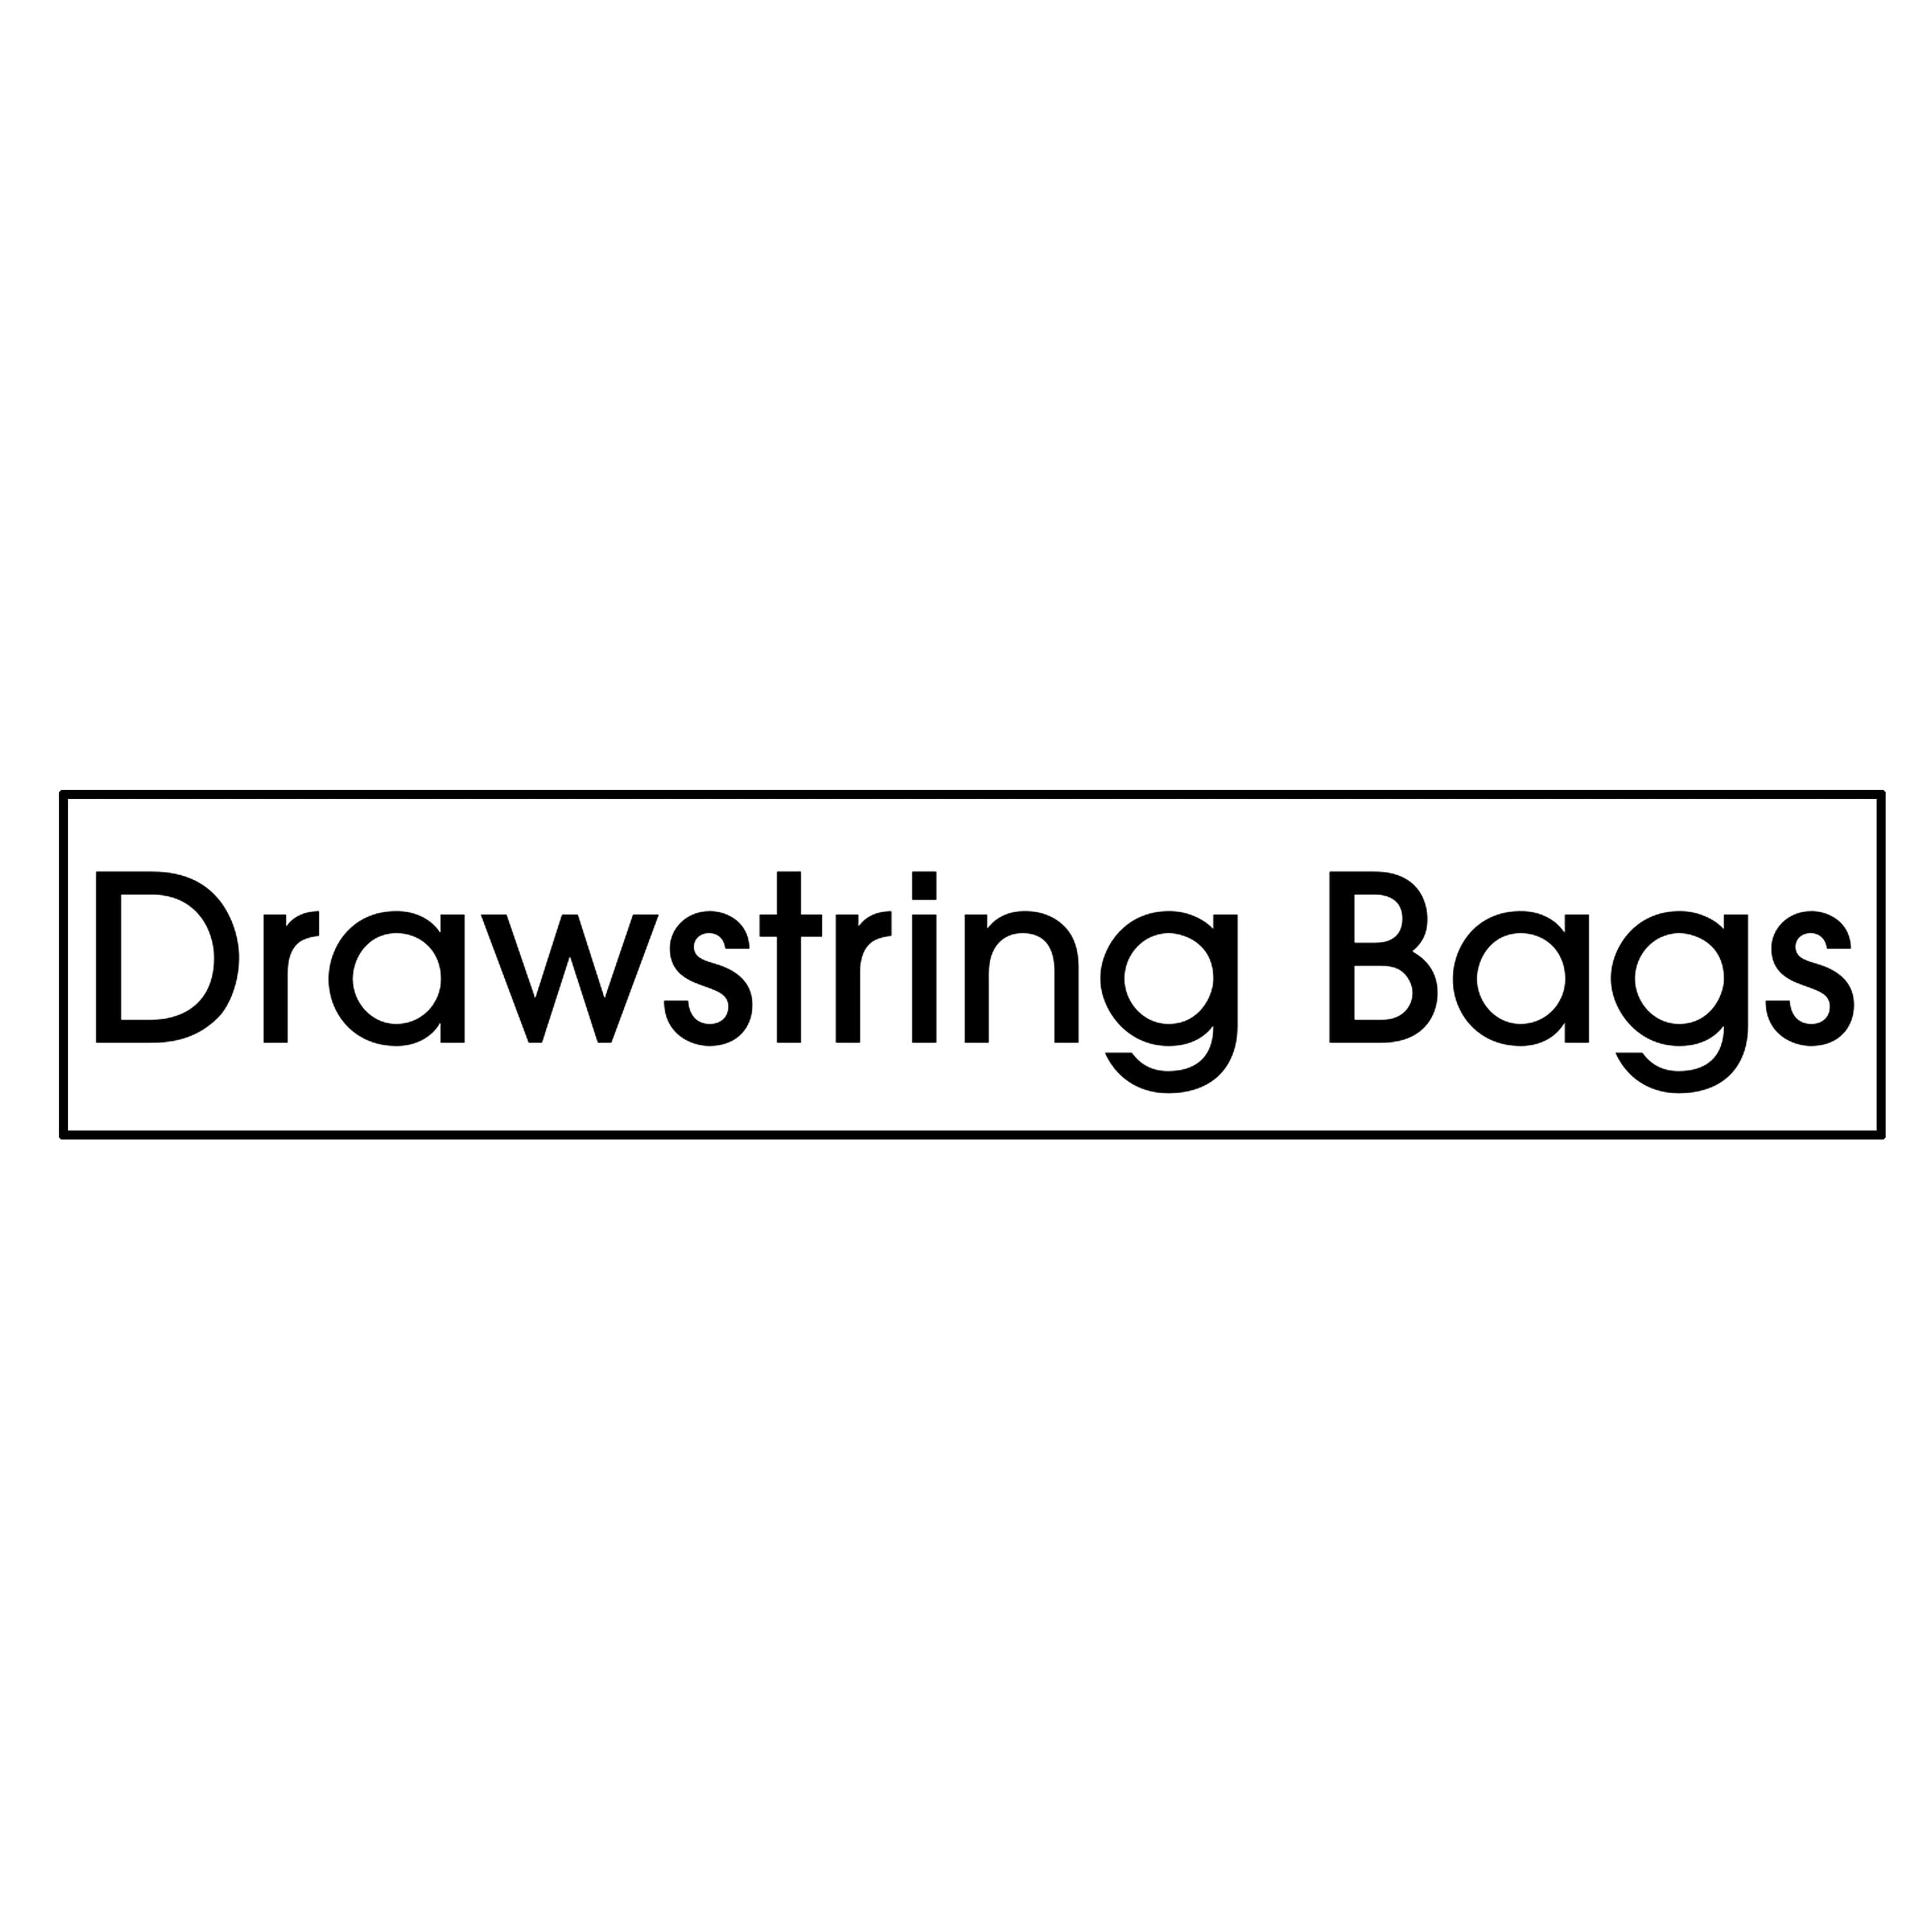 Great Value 30-Gallon Flap Tie Large Multi-Purpose Bags, Unscented, 20 Bags